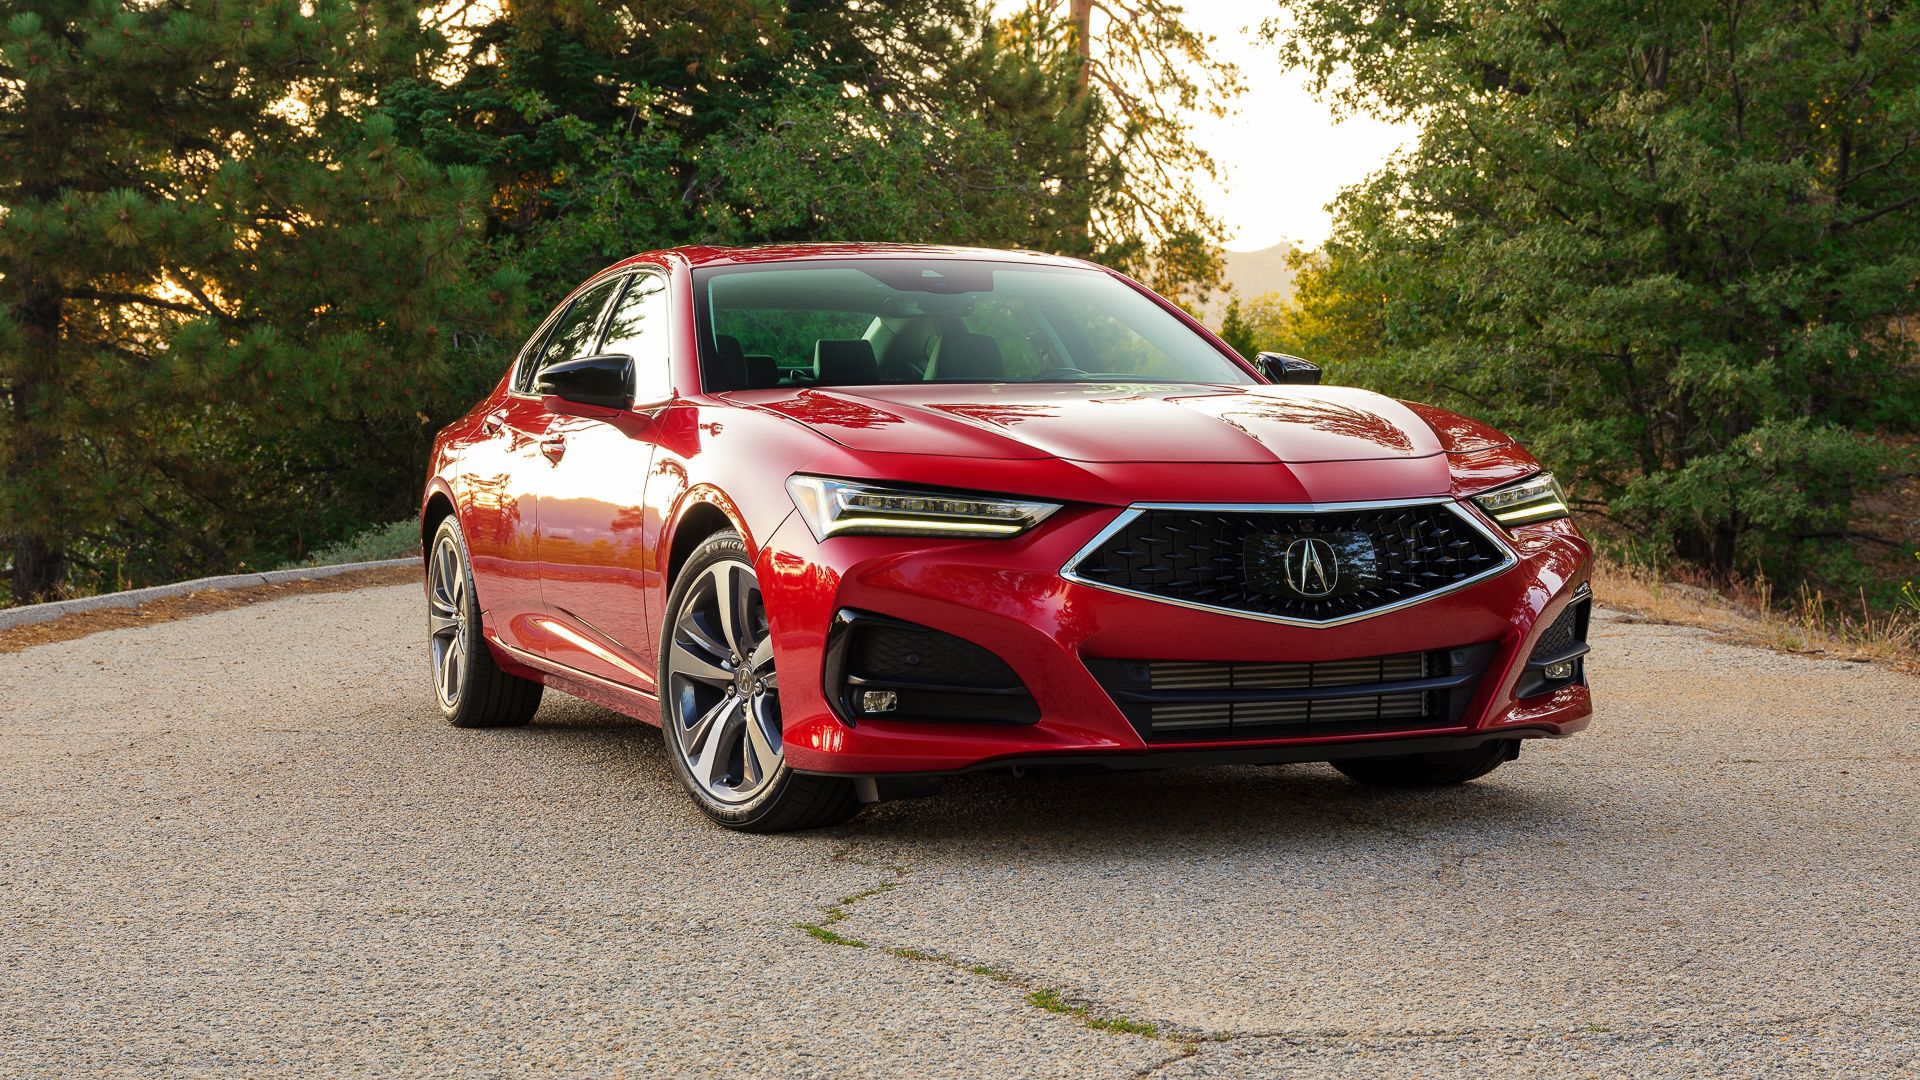 2023 Red Acura TLX parked